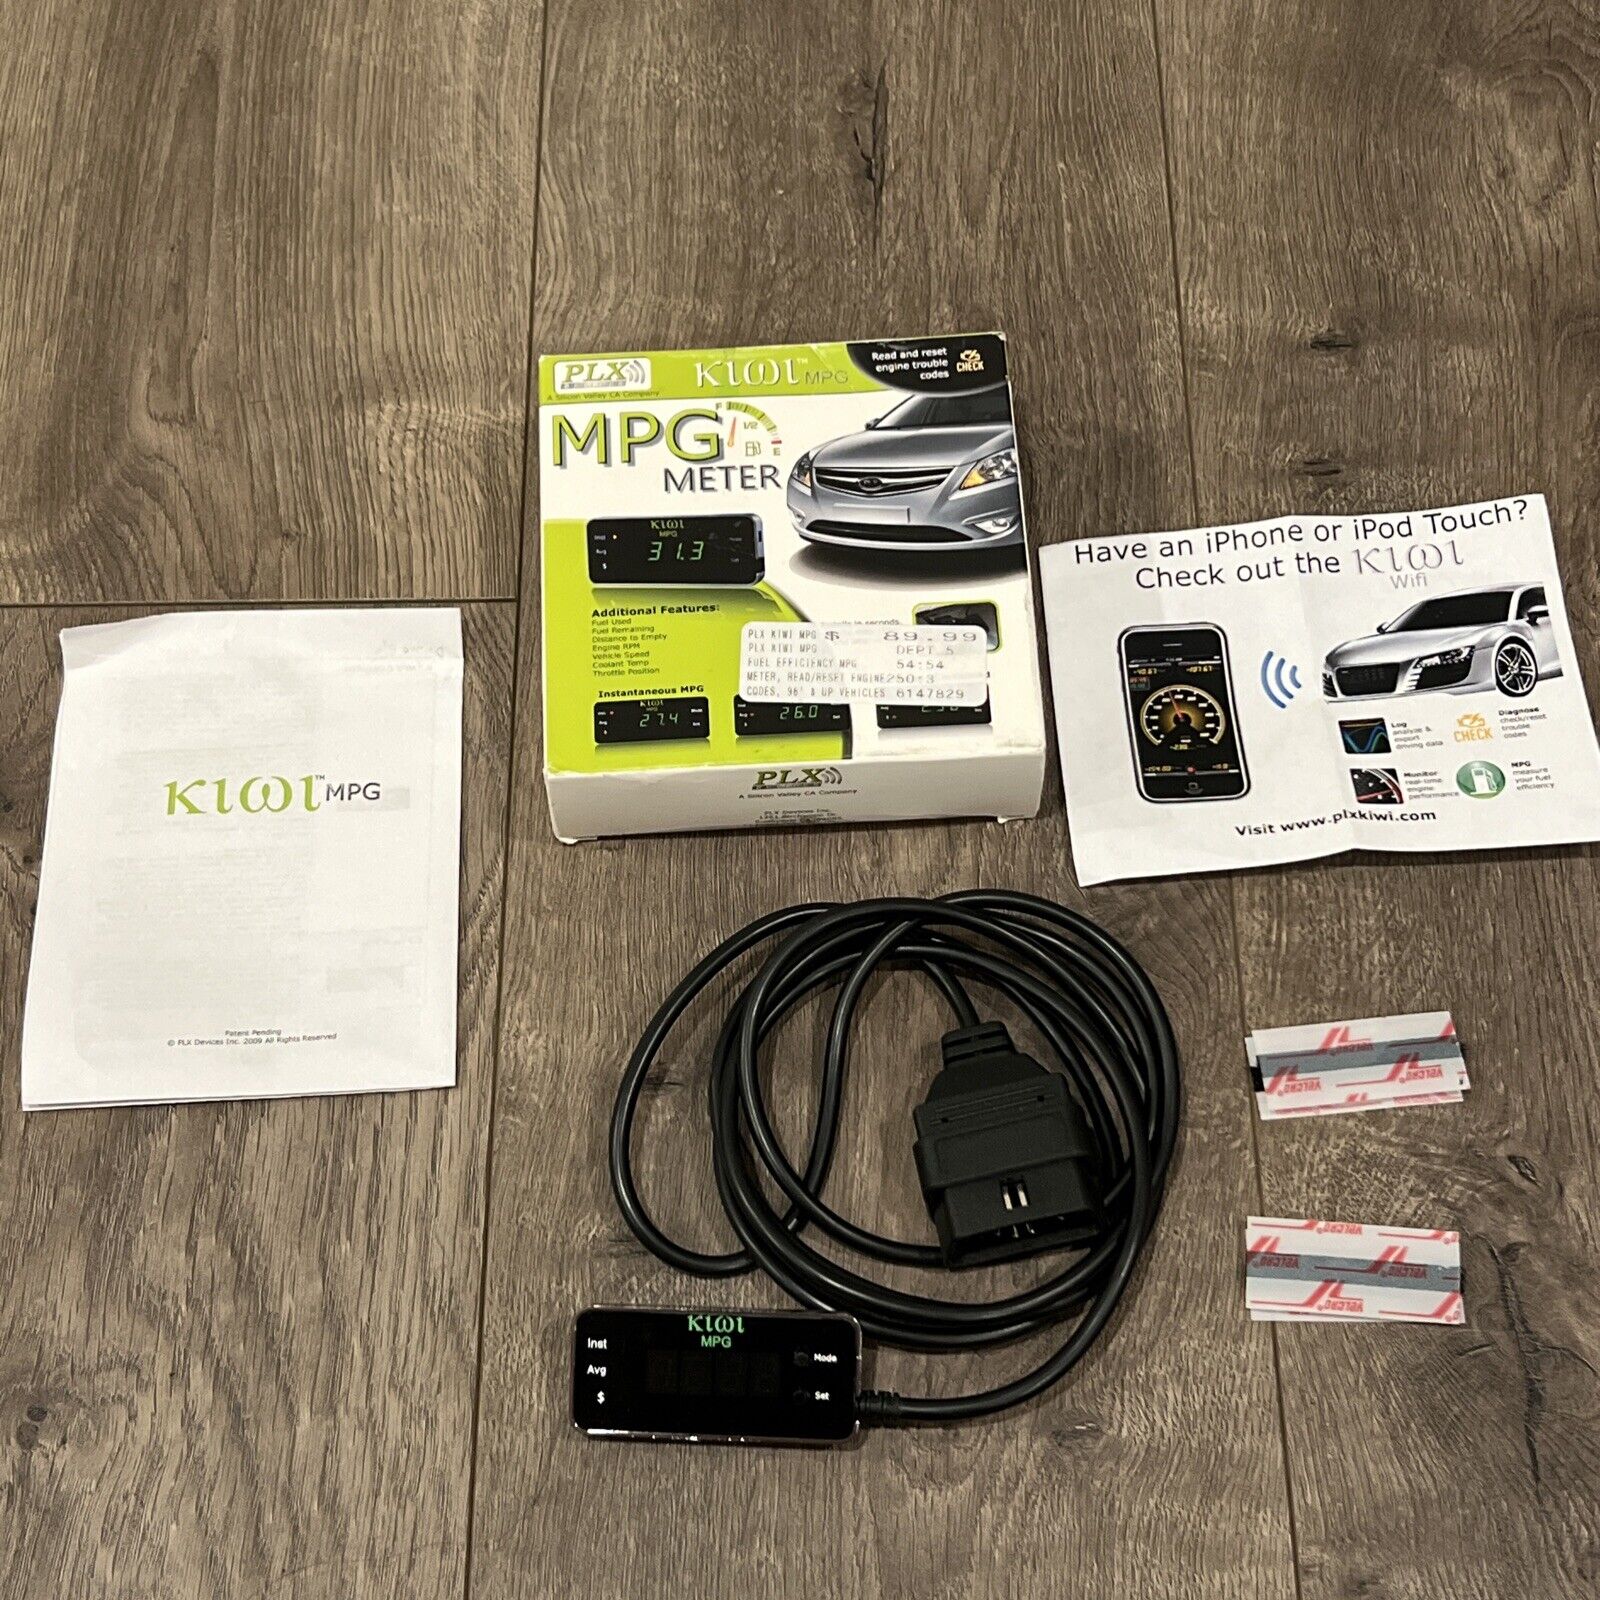 KIWI PLX scan tool OBDII code reader learn to save MPG